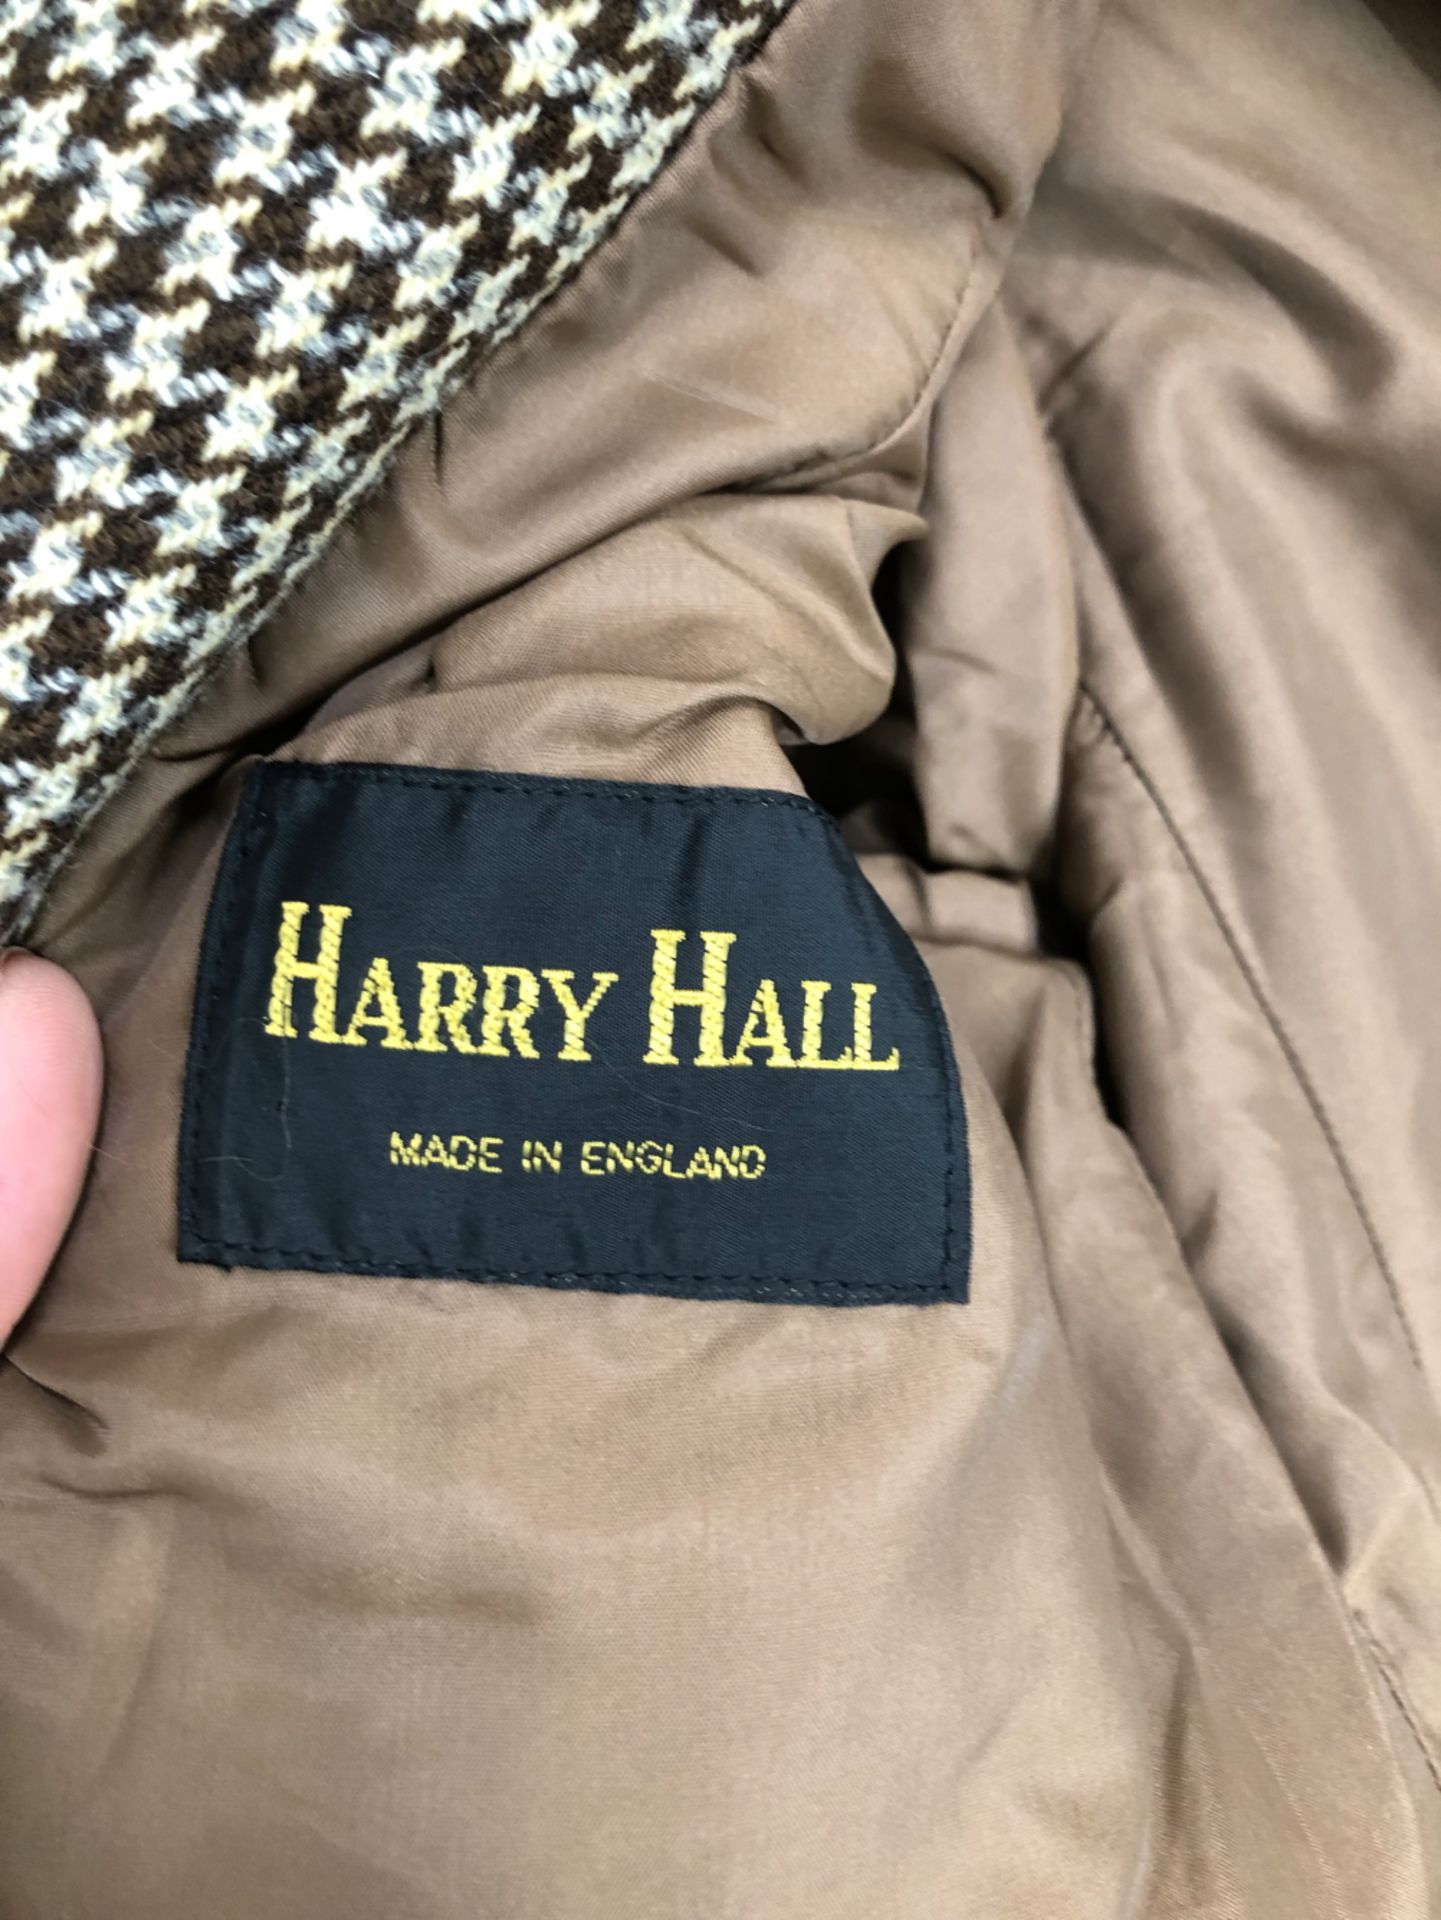 JACKET. HARRY HALL, MADE IN ENGLAND 100% WOOL AND LINED CHECK JACKET PIT TO PIT 43cms, SHOULDER TO - Image 5 of 11